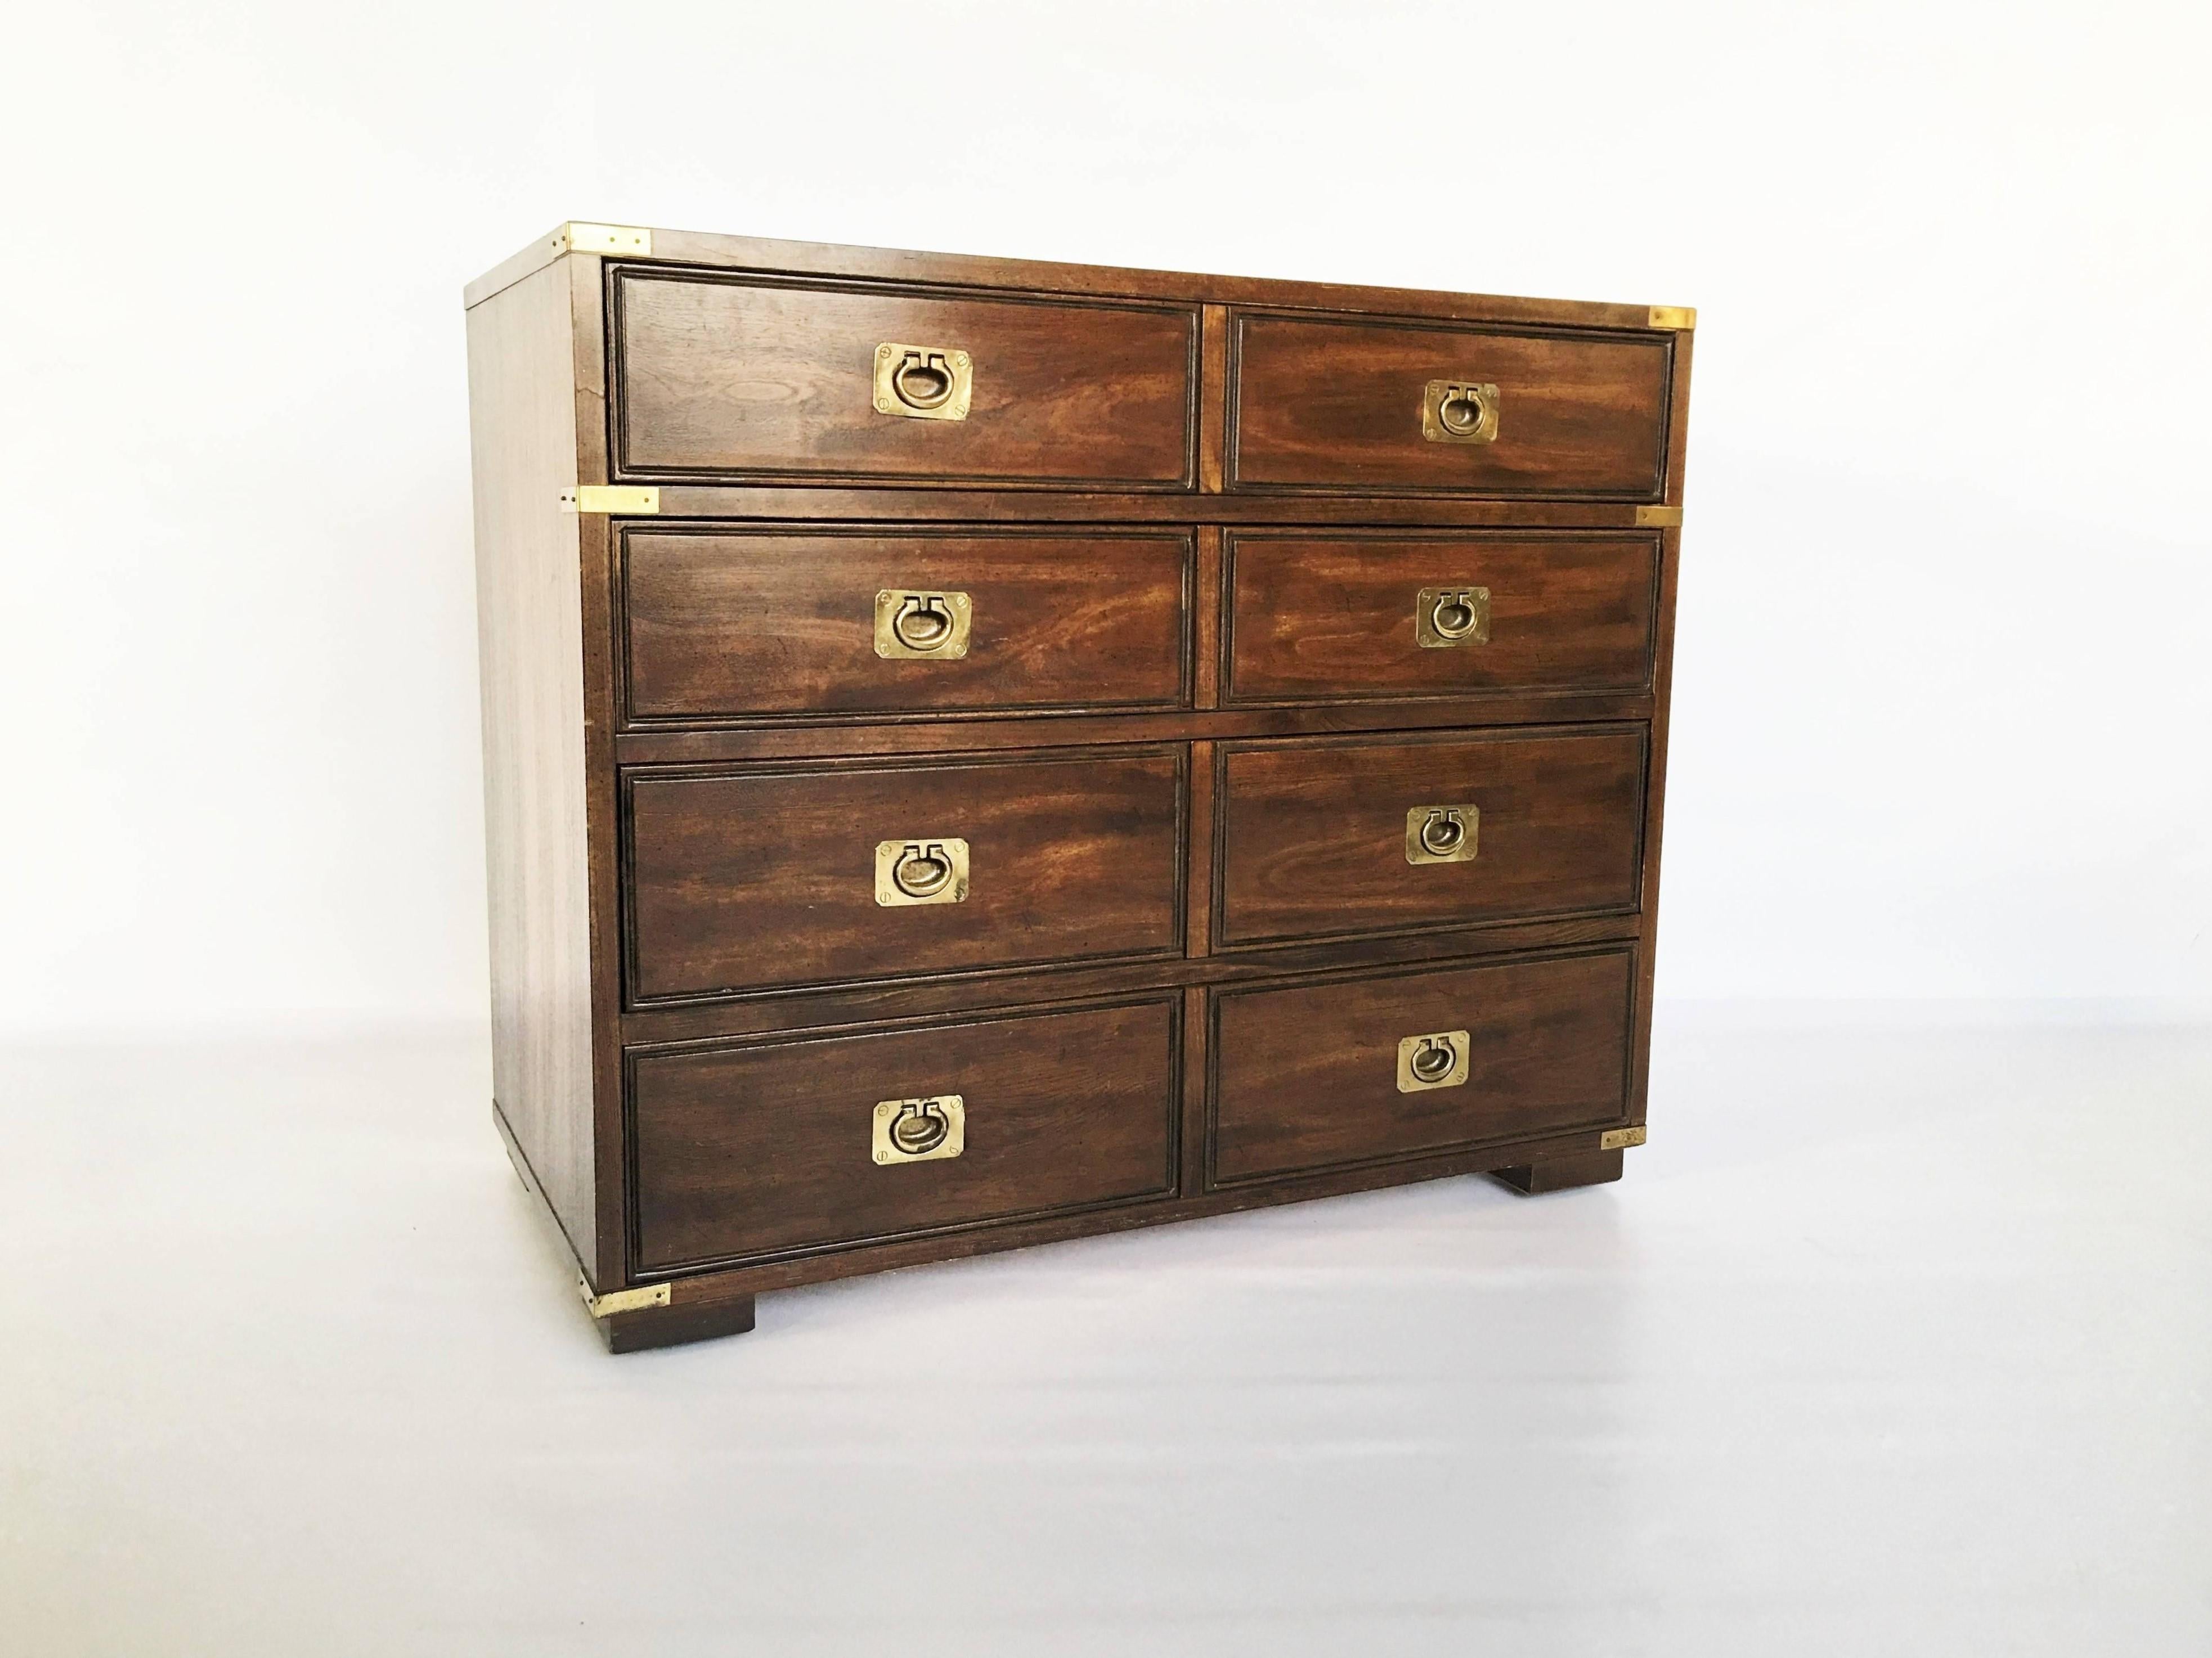 Military Officer's Campaign style bachelor chest by Thomasville. Featuring a handsome walnut exterior, showing eight equally divided short drawers. The brass-bound chest accented with brass hardware, resting on four rectangular feet. Can be